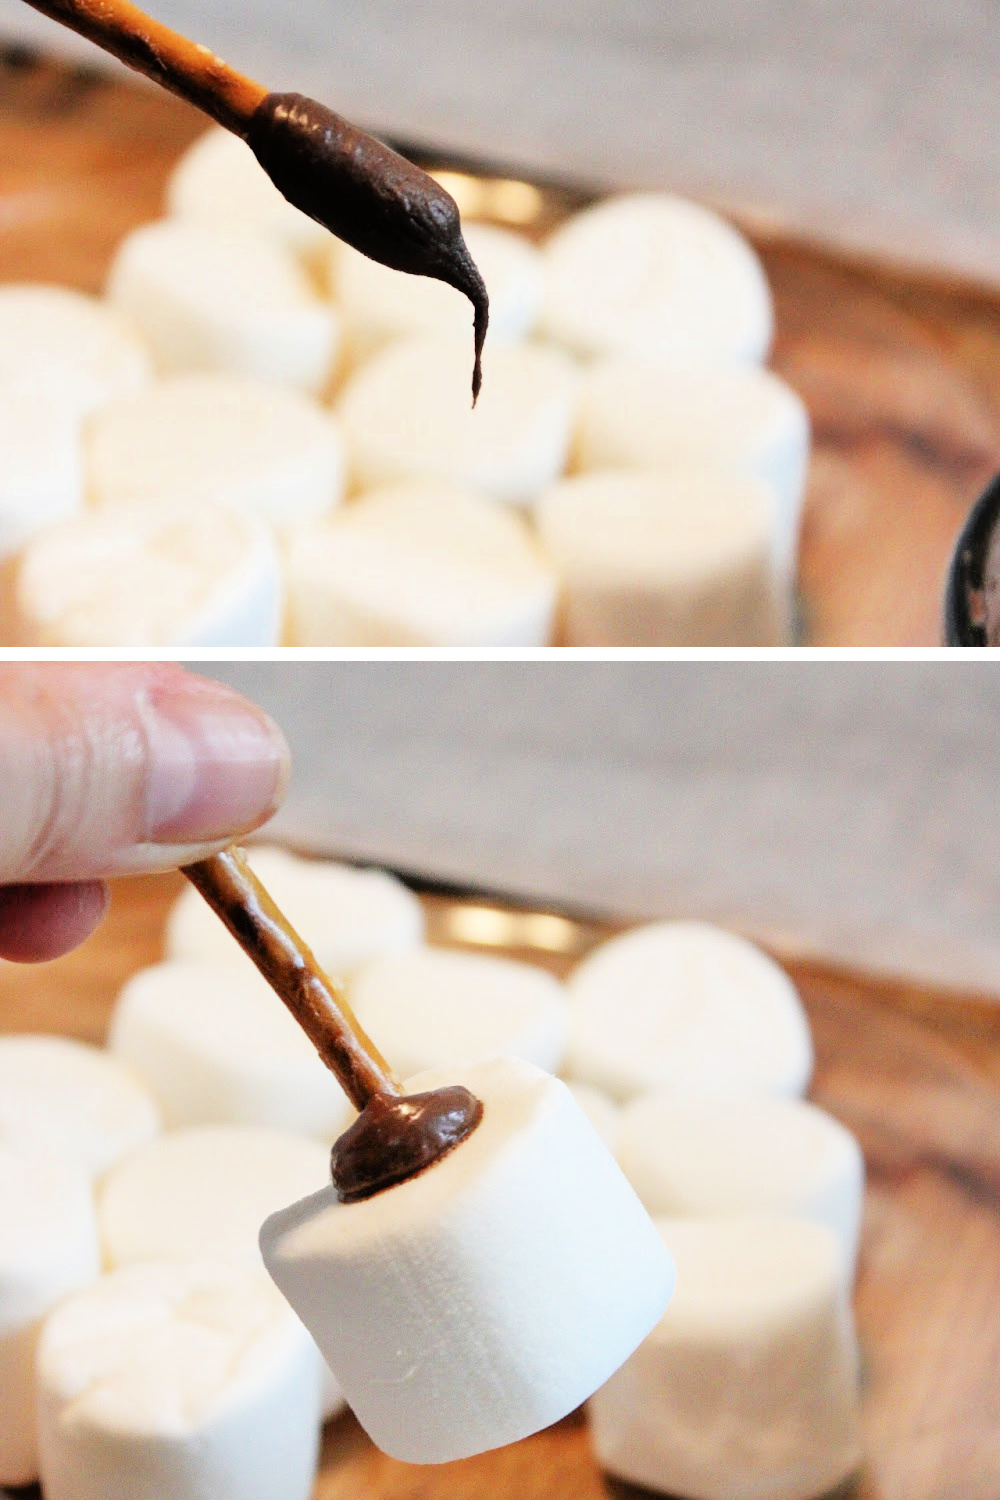 Dip a small pretzel stick in melted chocolate and stick it into the middle of a marshmallow.